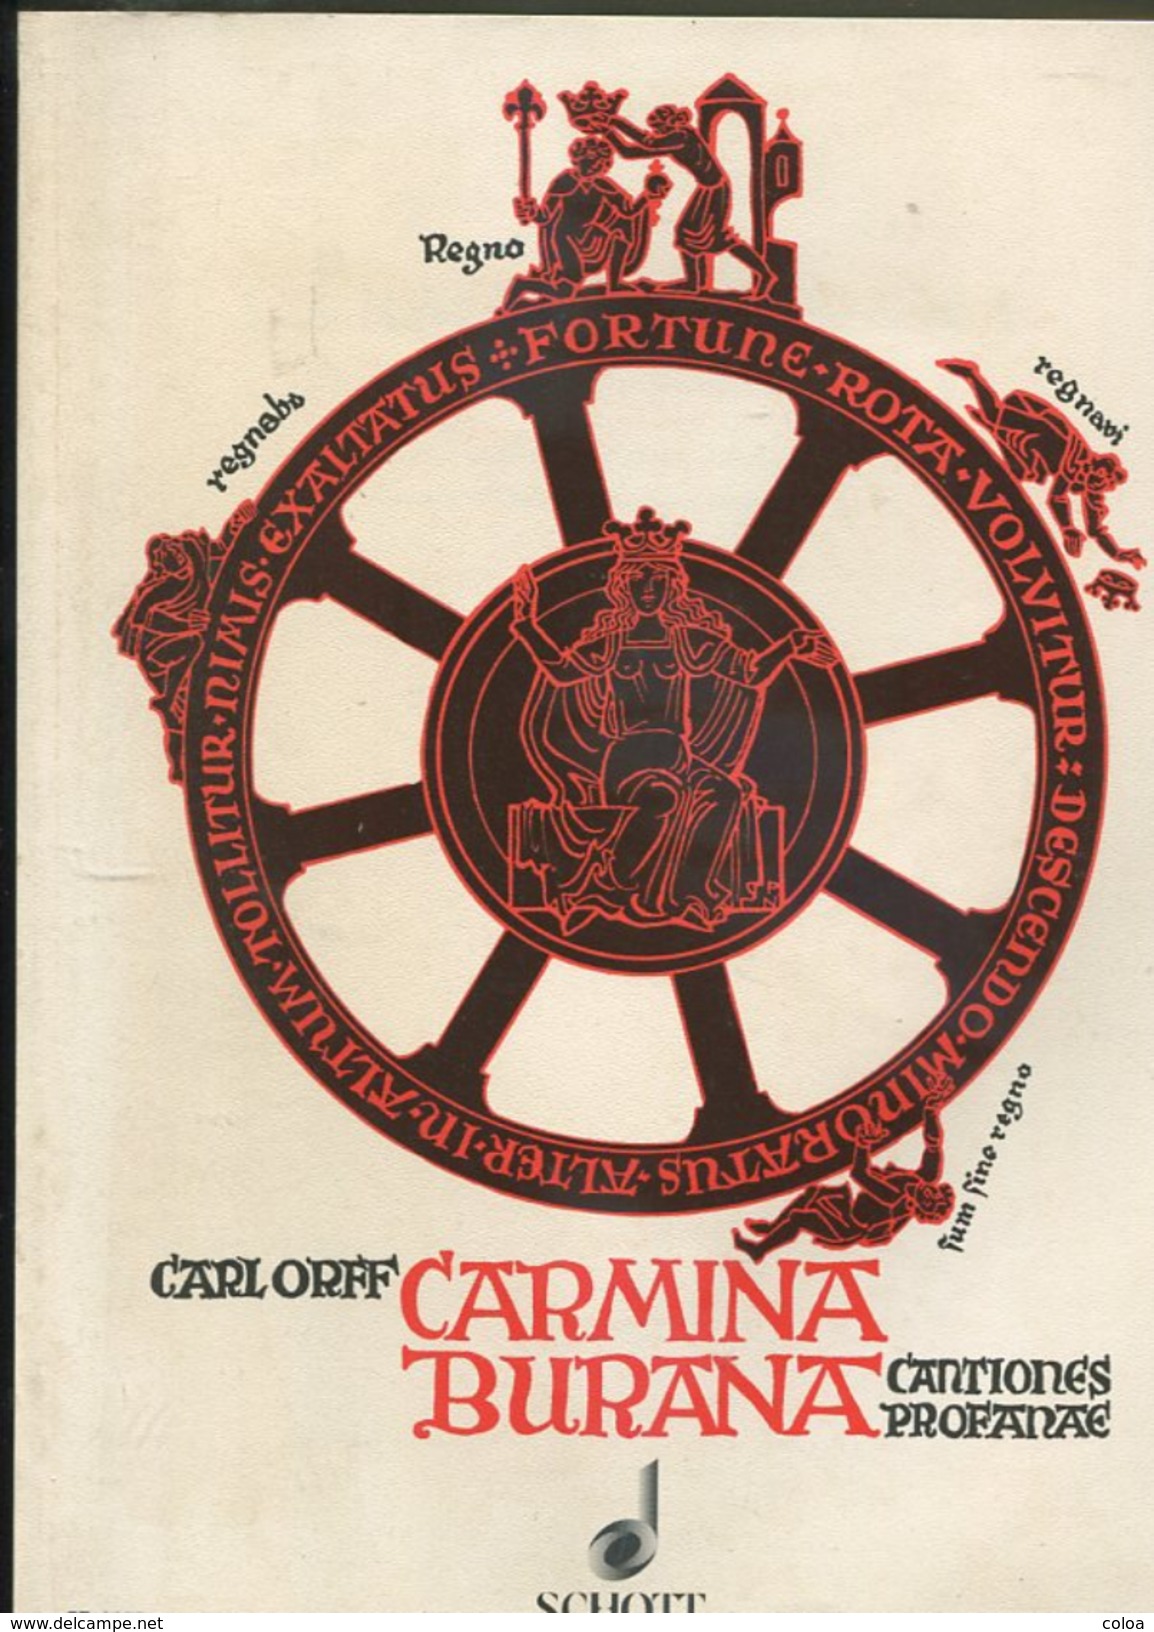 Partition Carl OFF Carmina Burana Cantiones Profanae - Partitions Musicales Anciennes